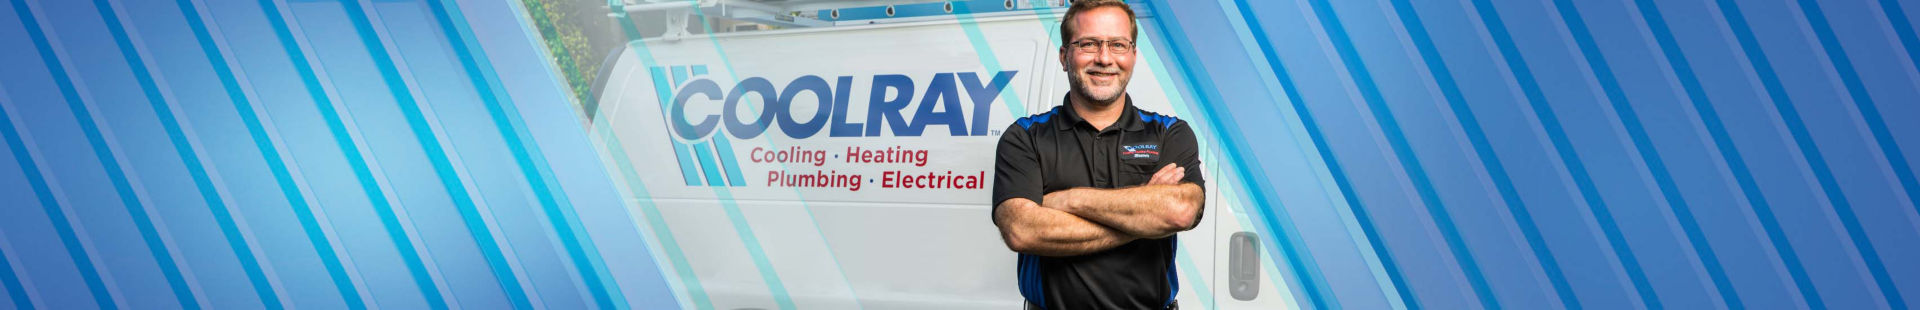 HVAC technician in front of a Coolray service vehicle